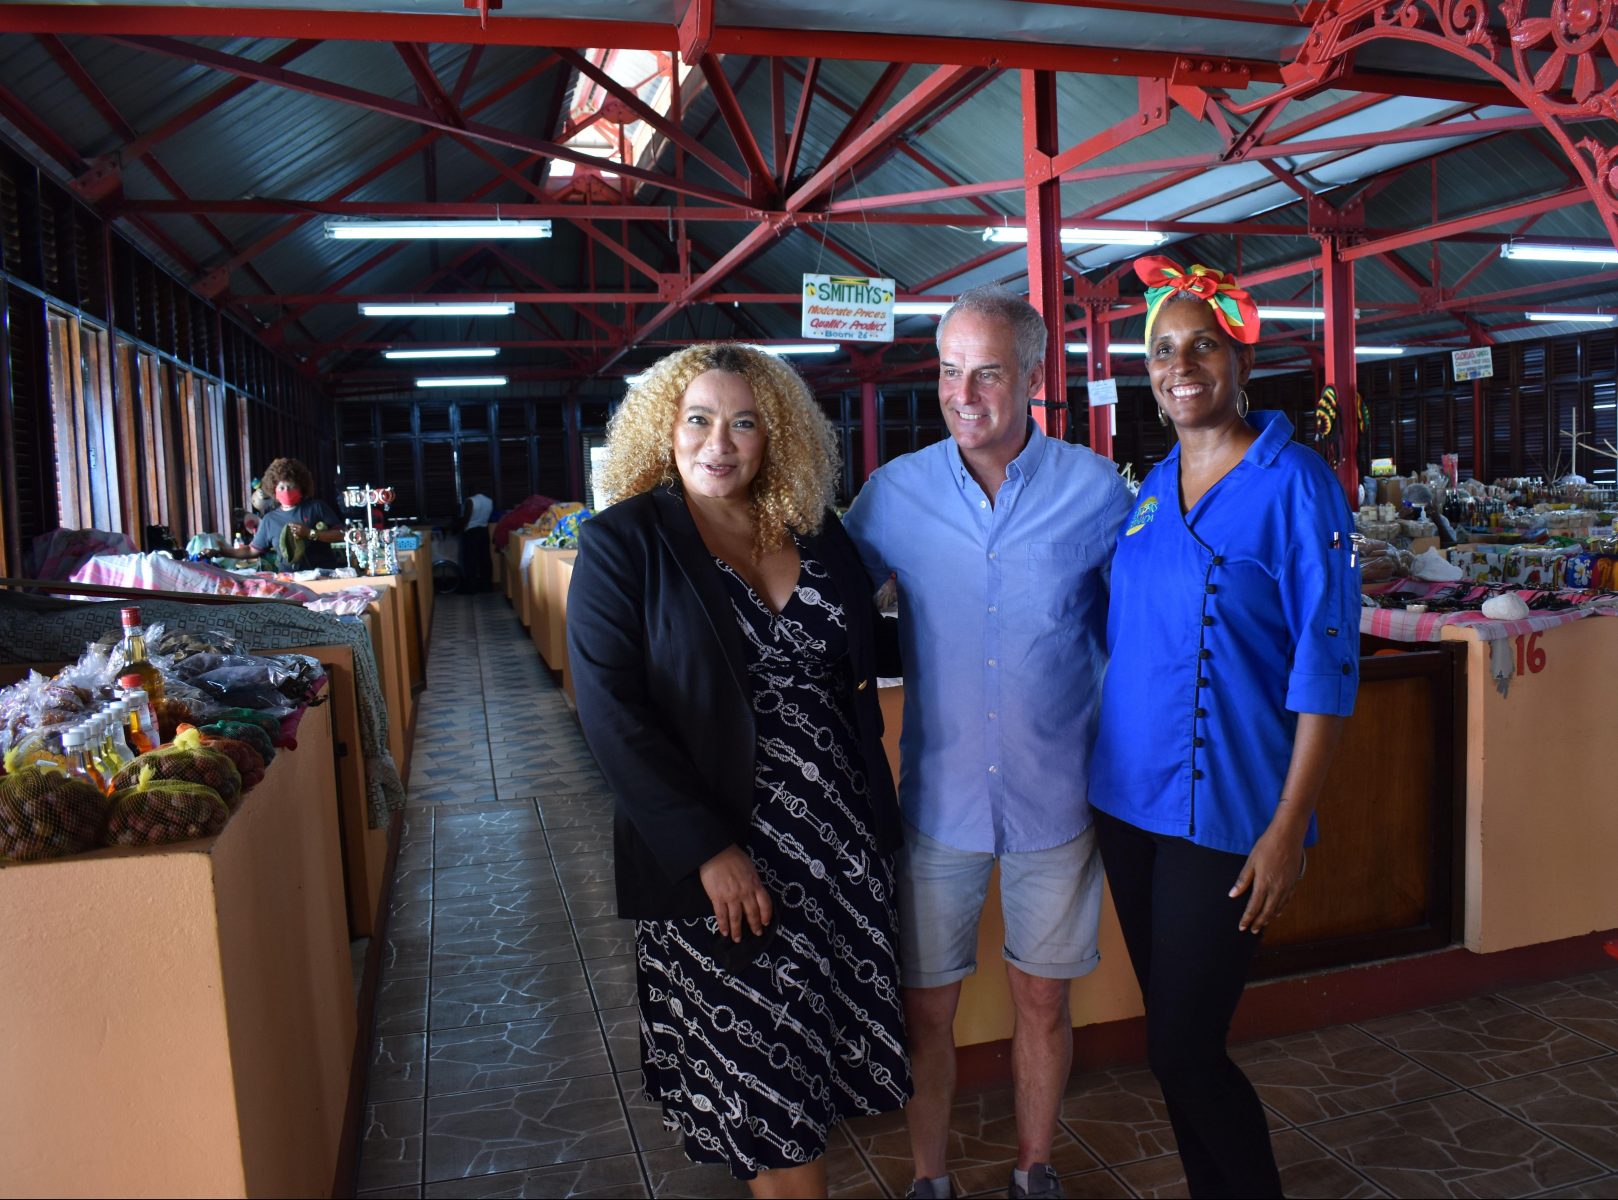 Grenada hosts celebrity chef Philip Vickery for filming with ITV’s This Morning